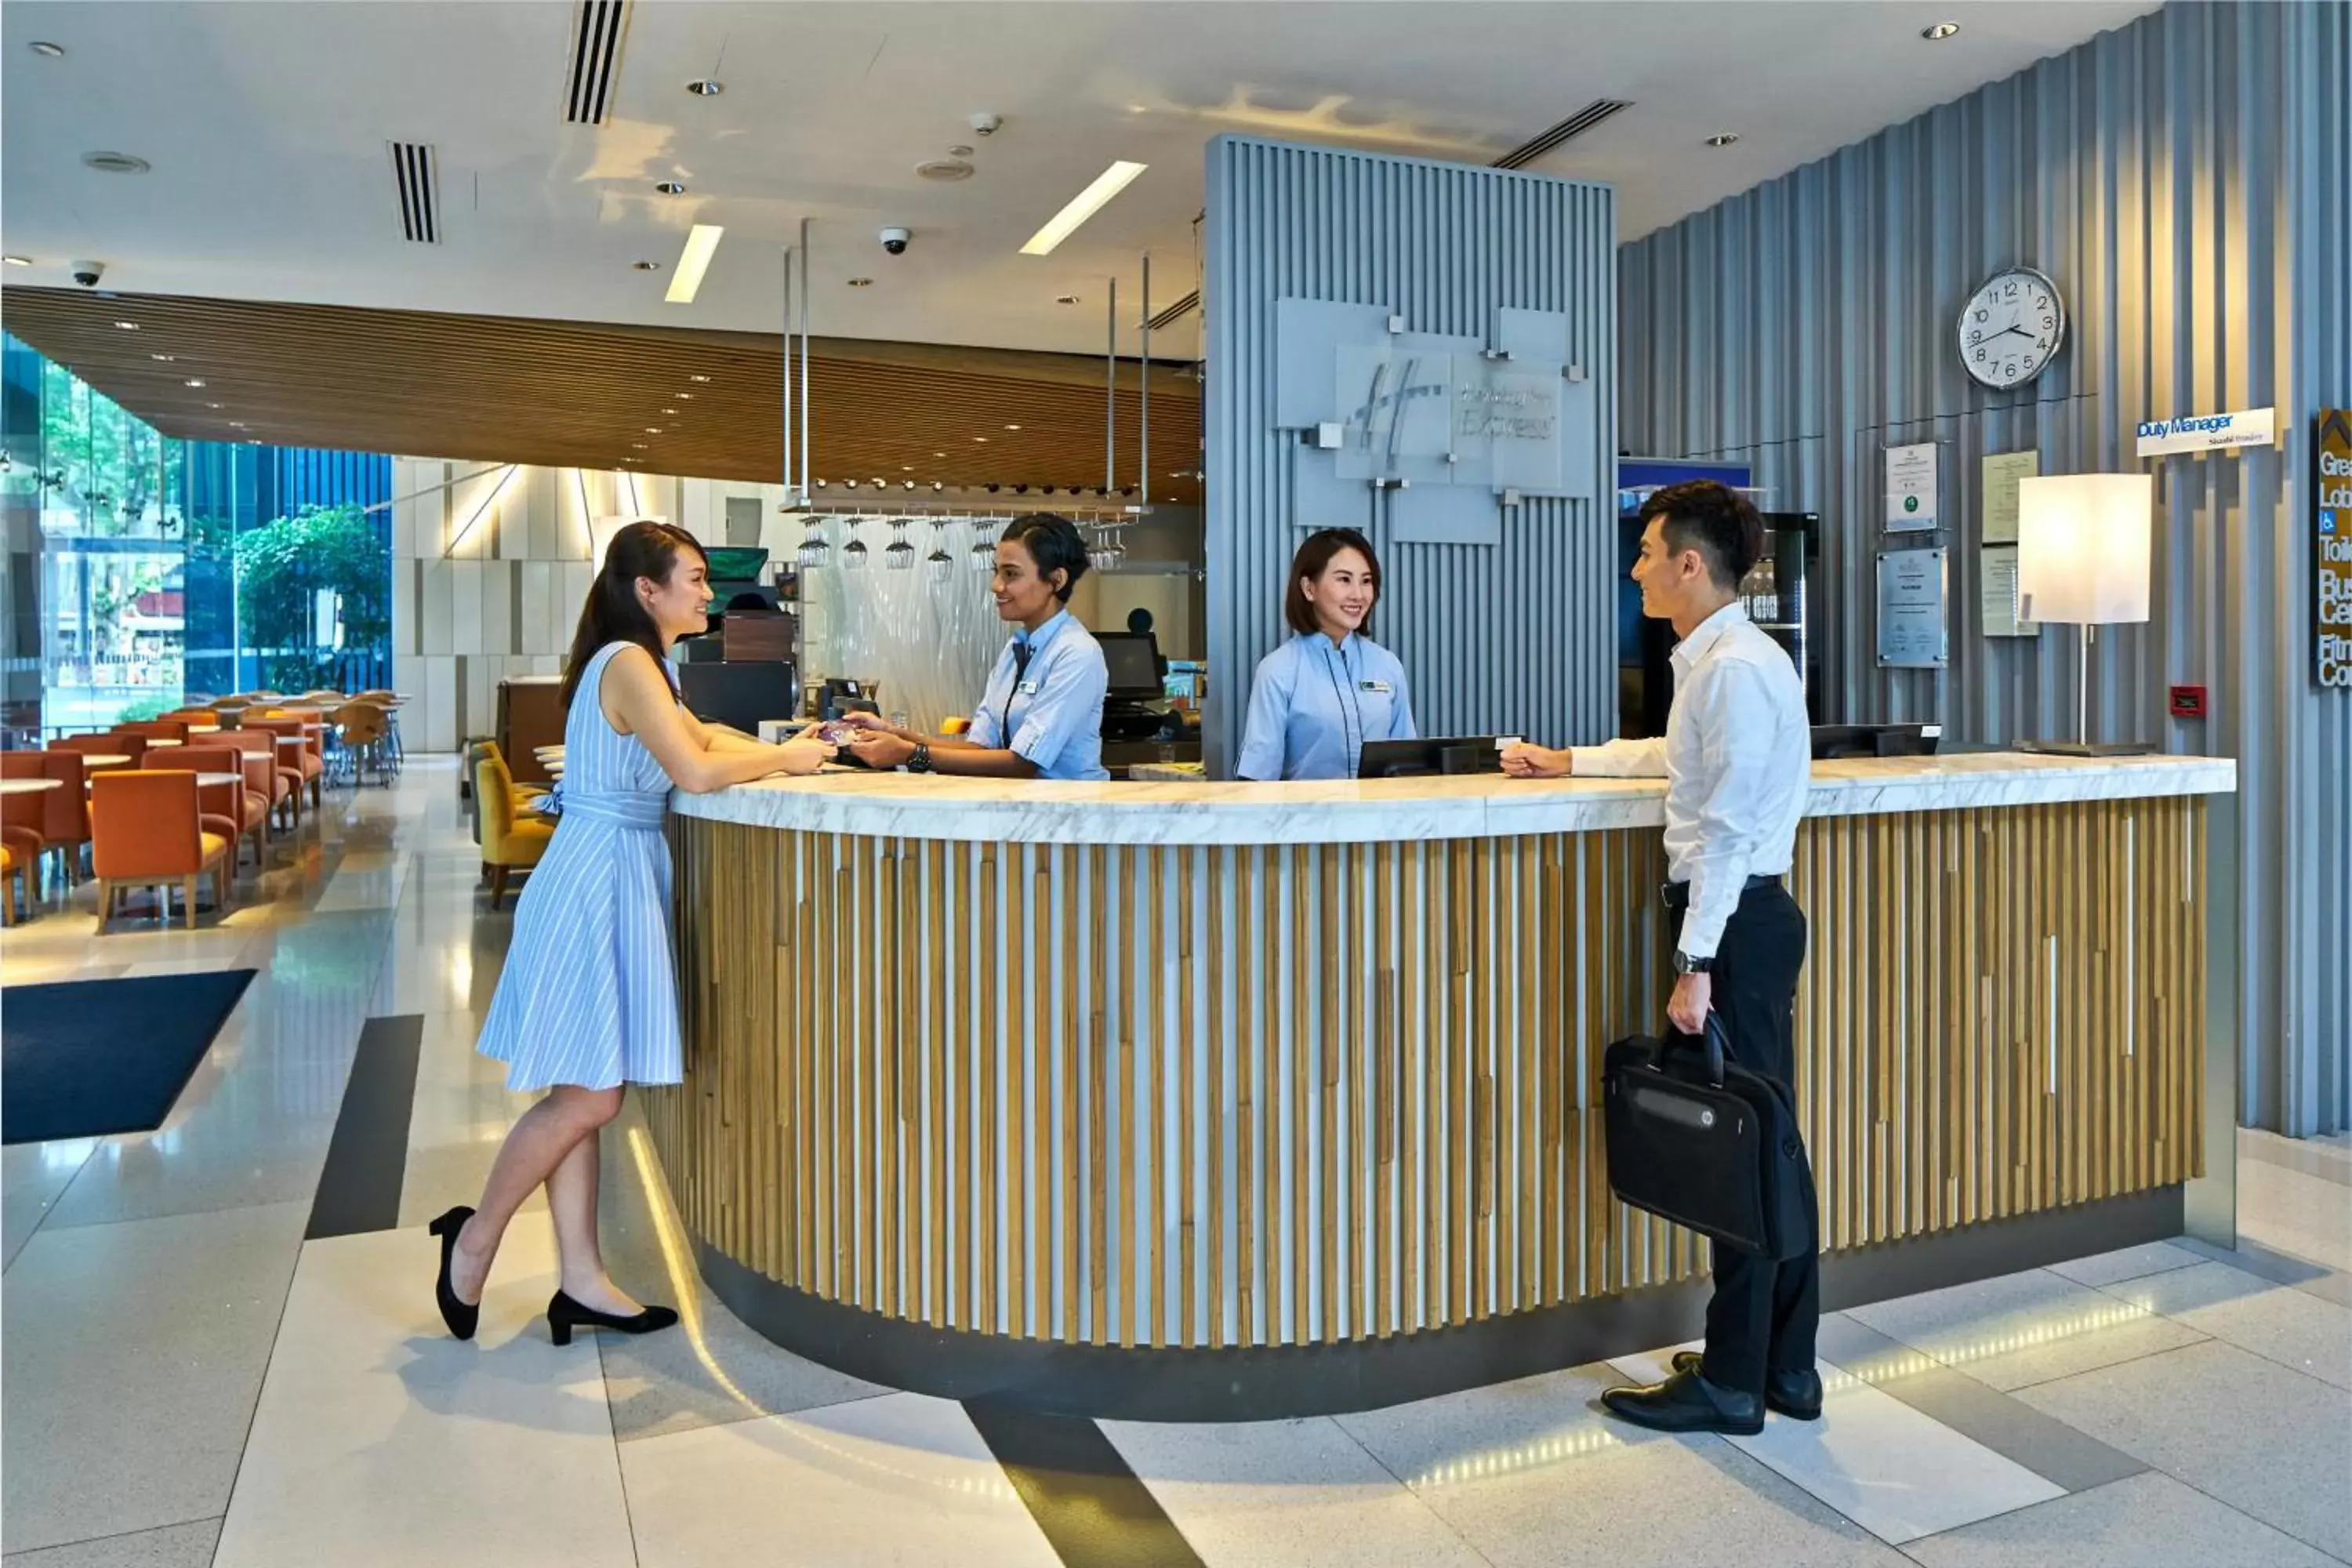 Property building in Holiday Inn Express Singapore Orchard Road, an IHG Hotel